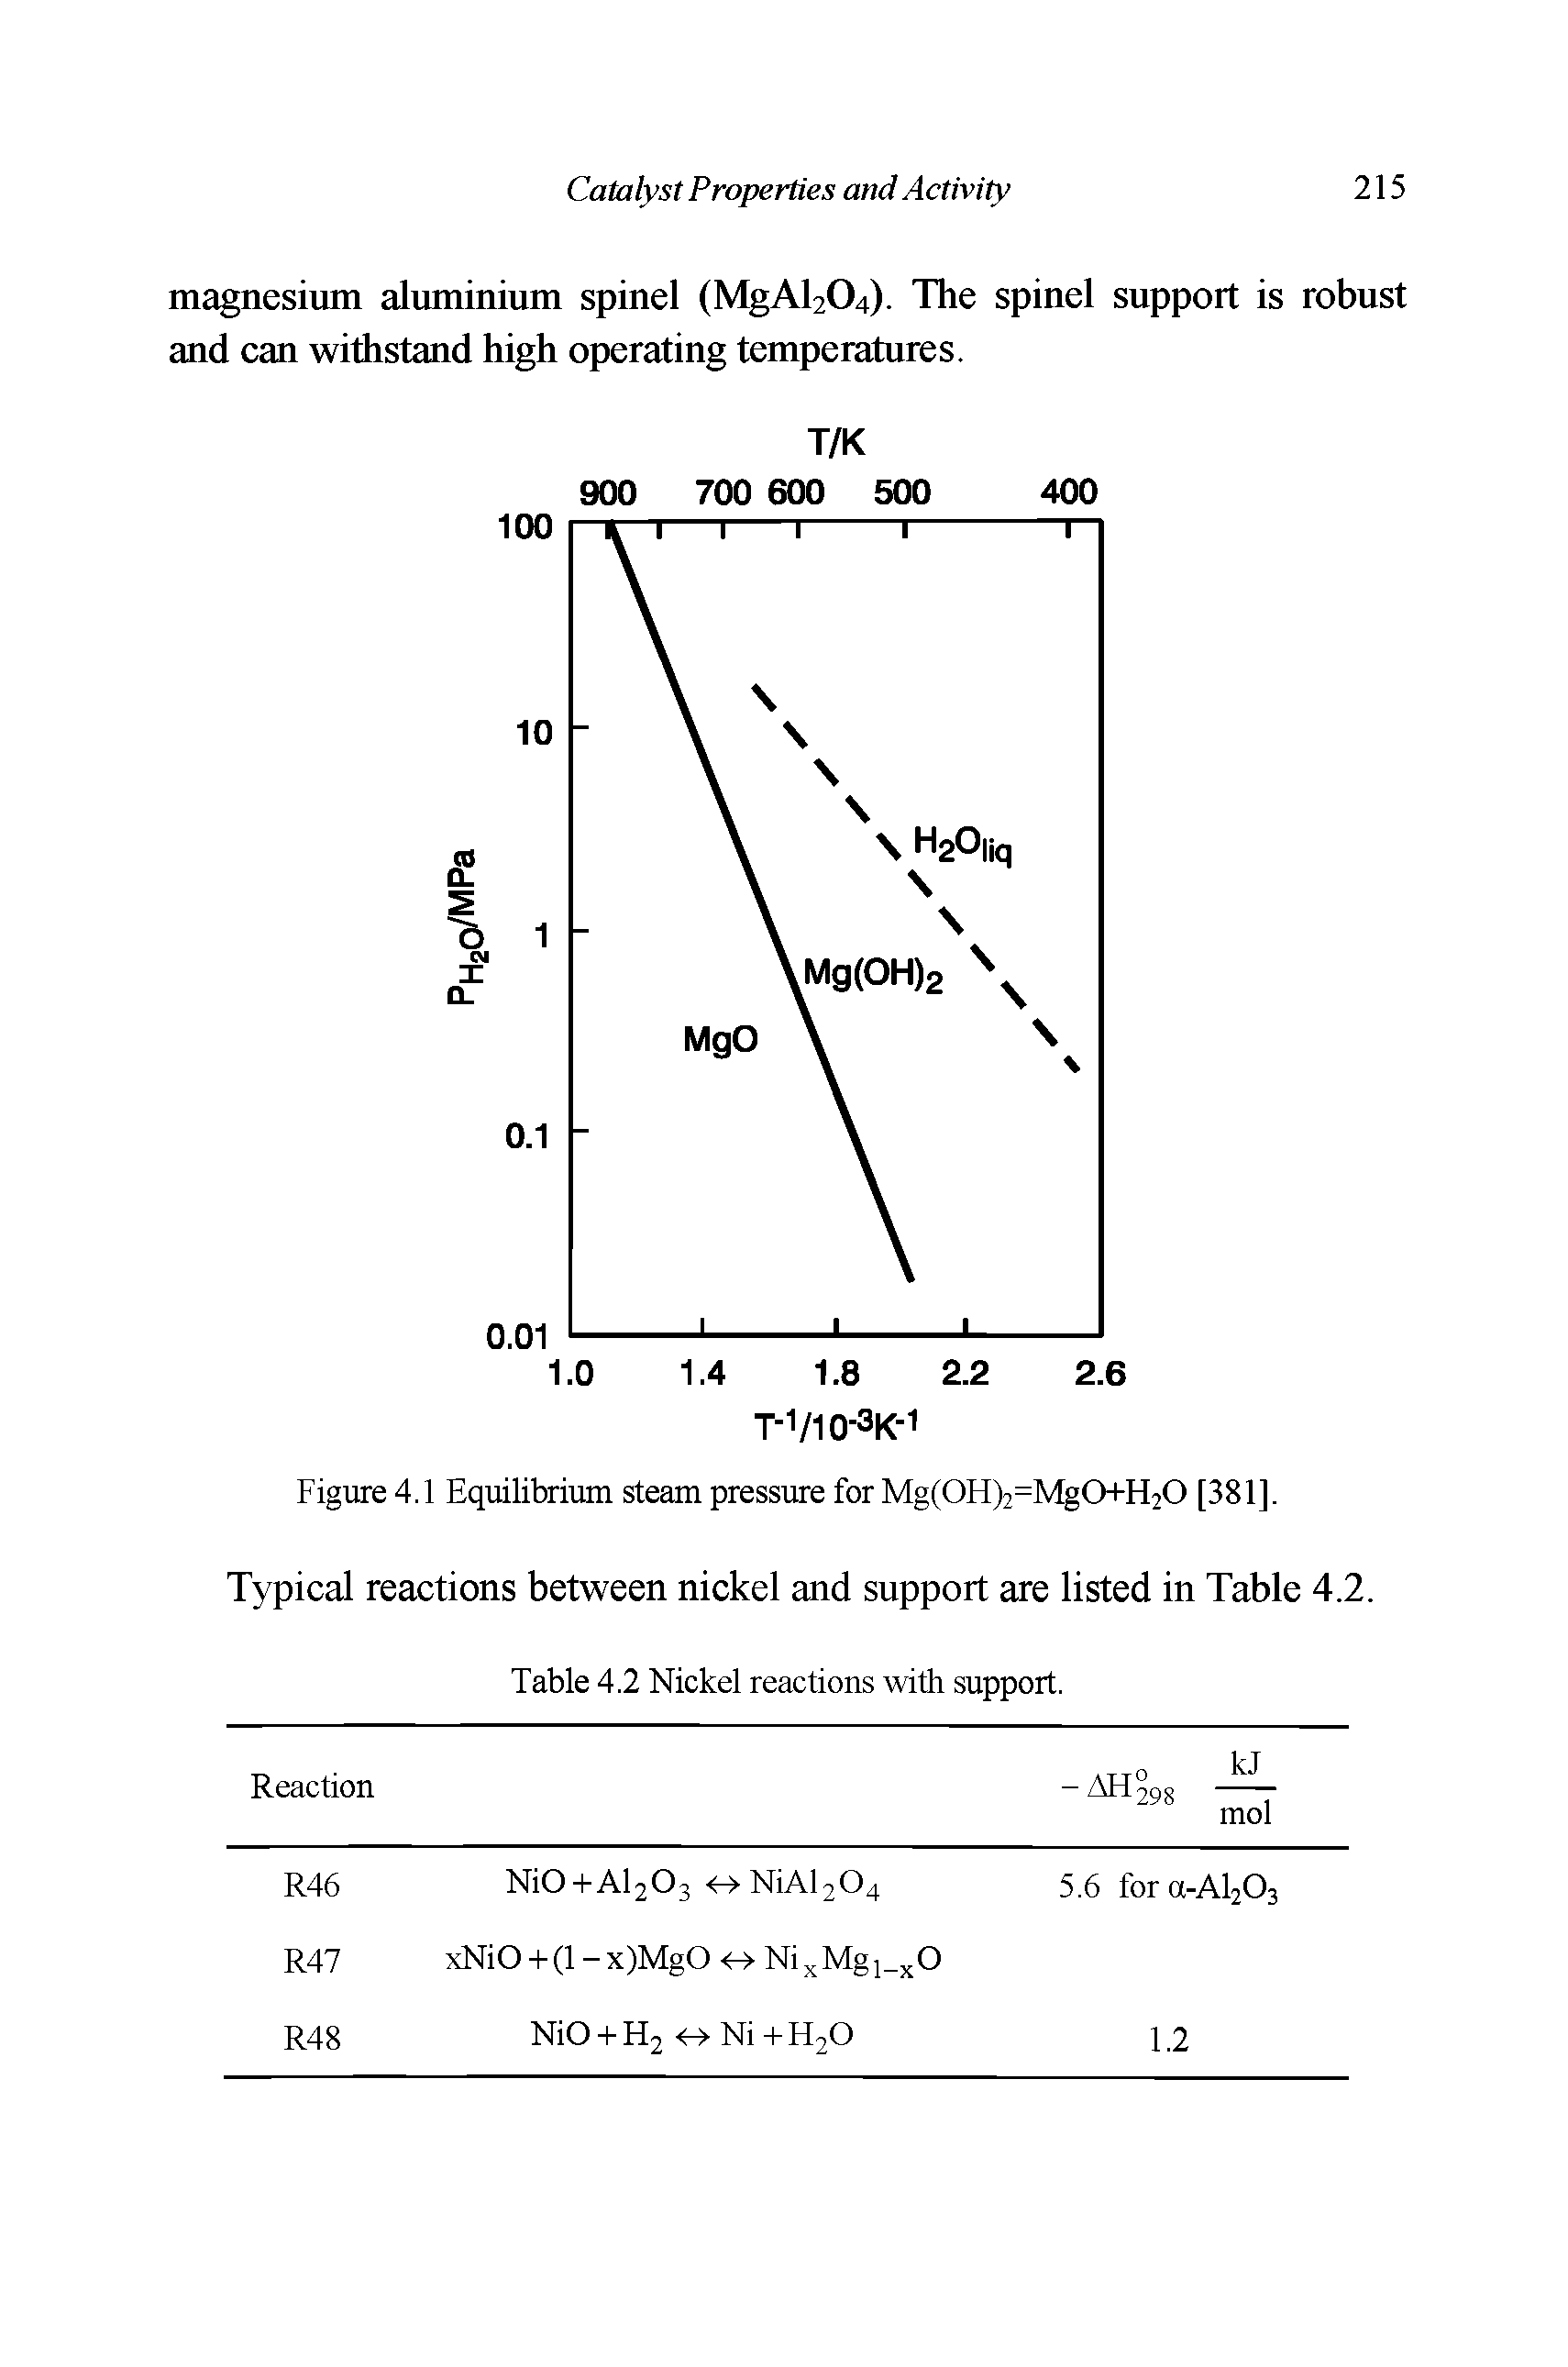 Figure 4.1 Equilibrium steam pressure for Mg(0H)2=MgCM-H20 [381]. Typical reactions between nickel and support are listed in Table 4.2.